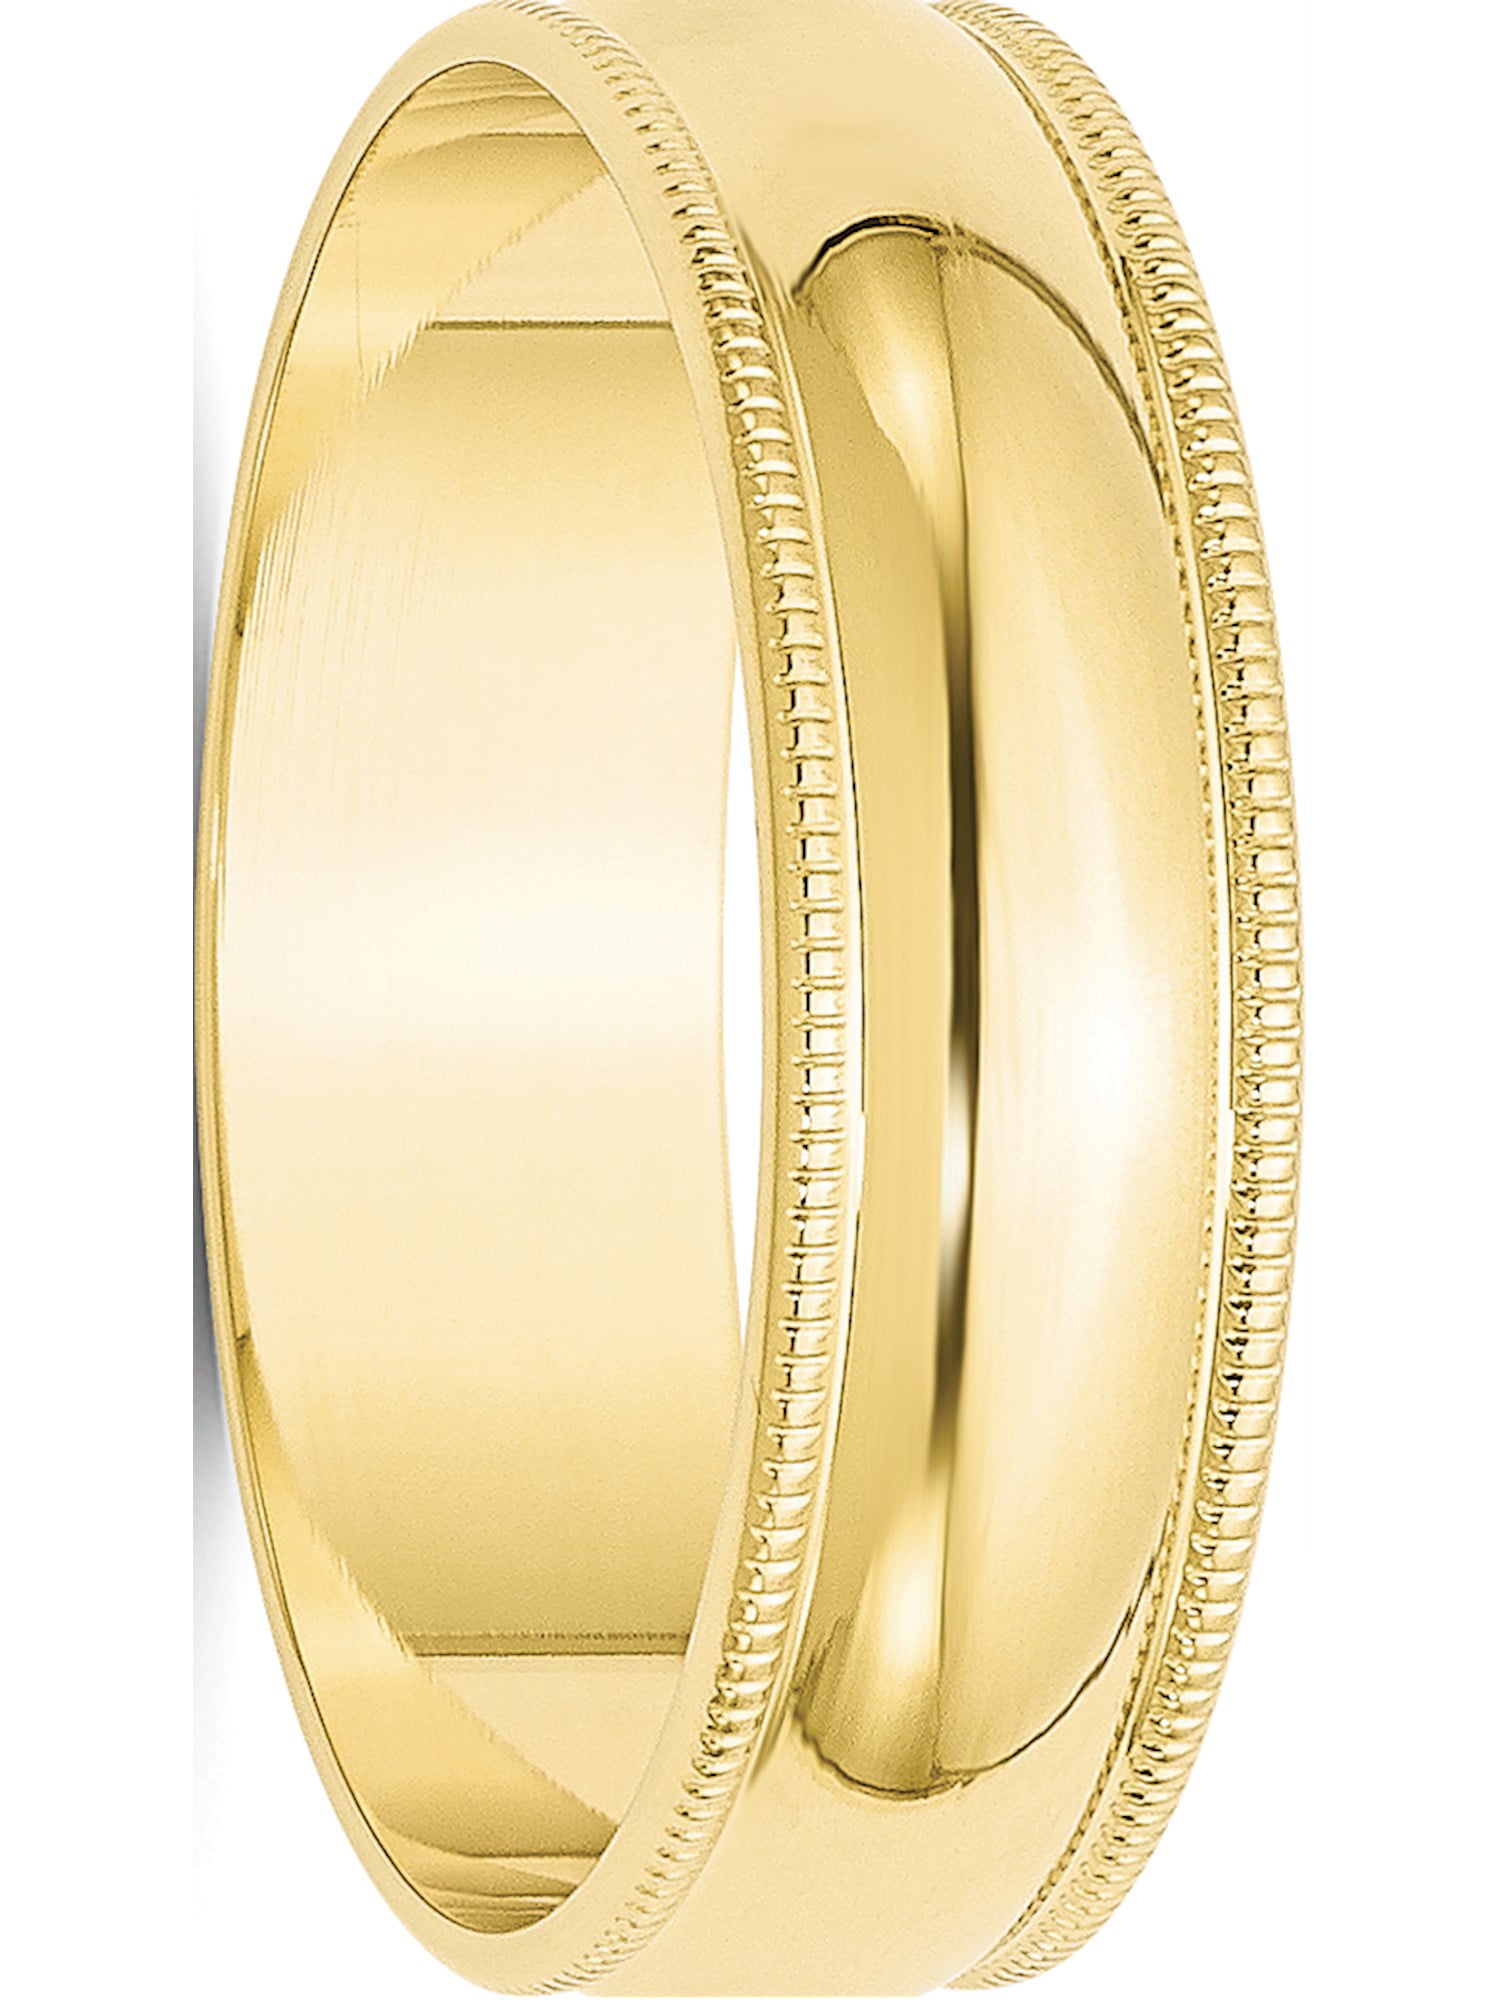 White Gold Solid 5mm COMFORT FIT Milgrain Wedding Band Ring Wellingsale Mens 14k Yellow OR